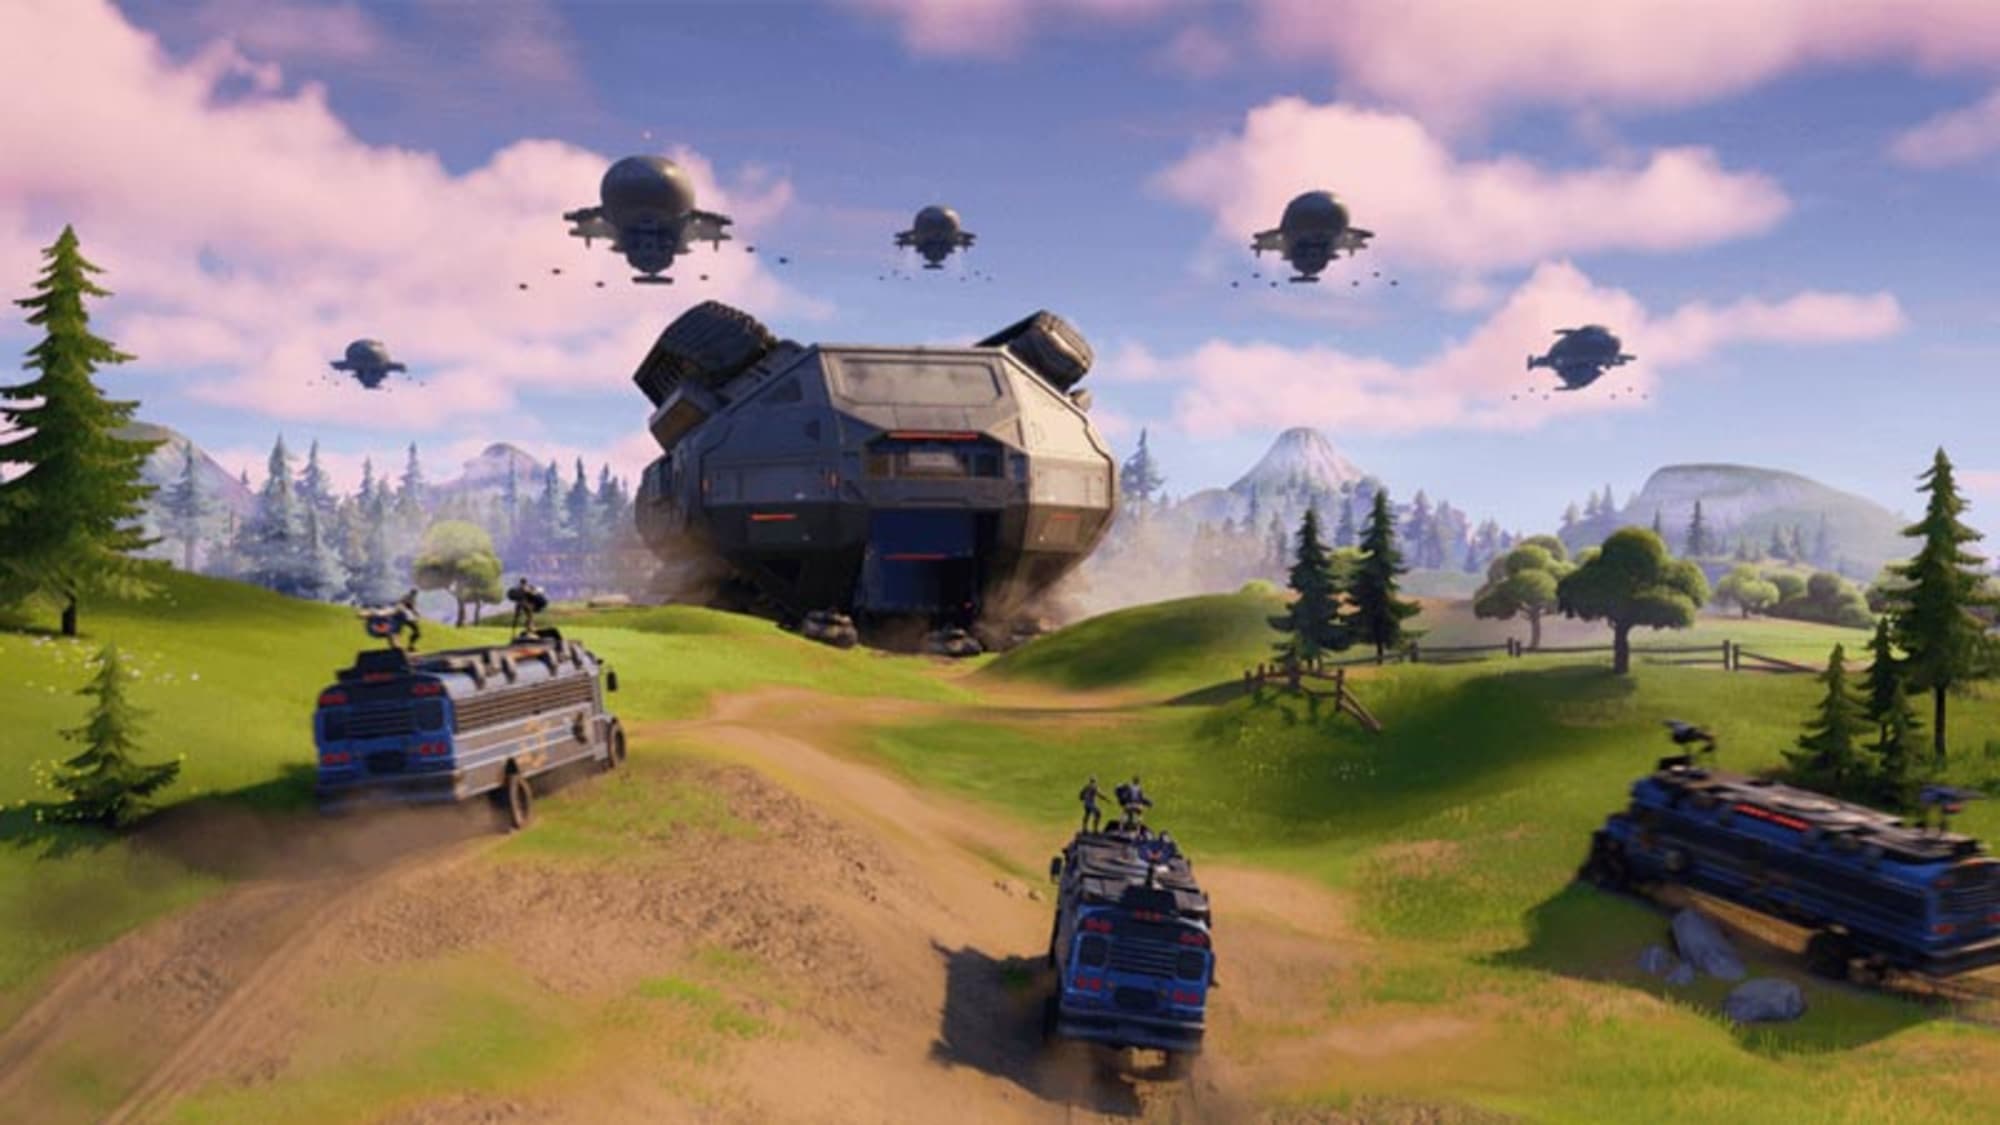 When is building returning to Fortnite?